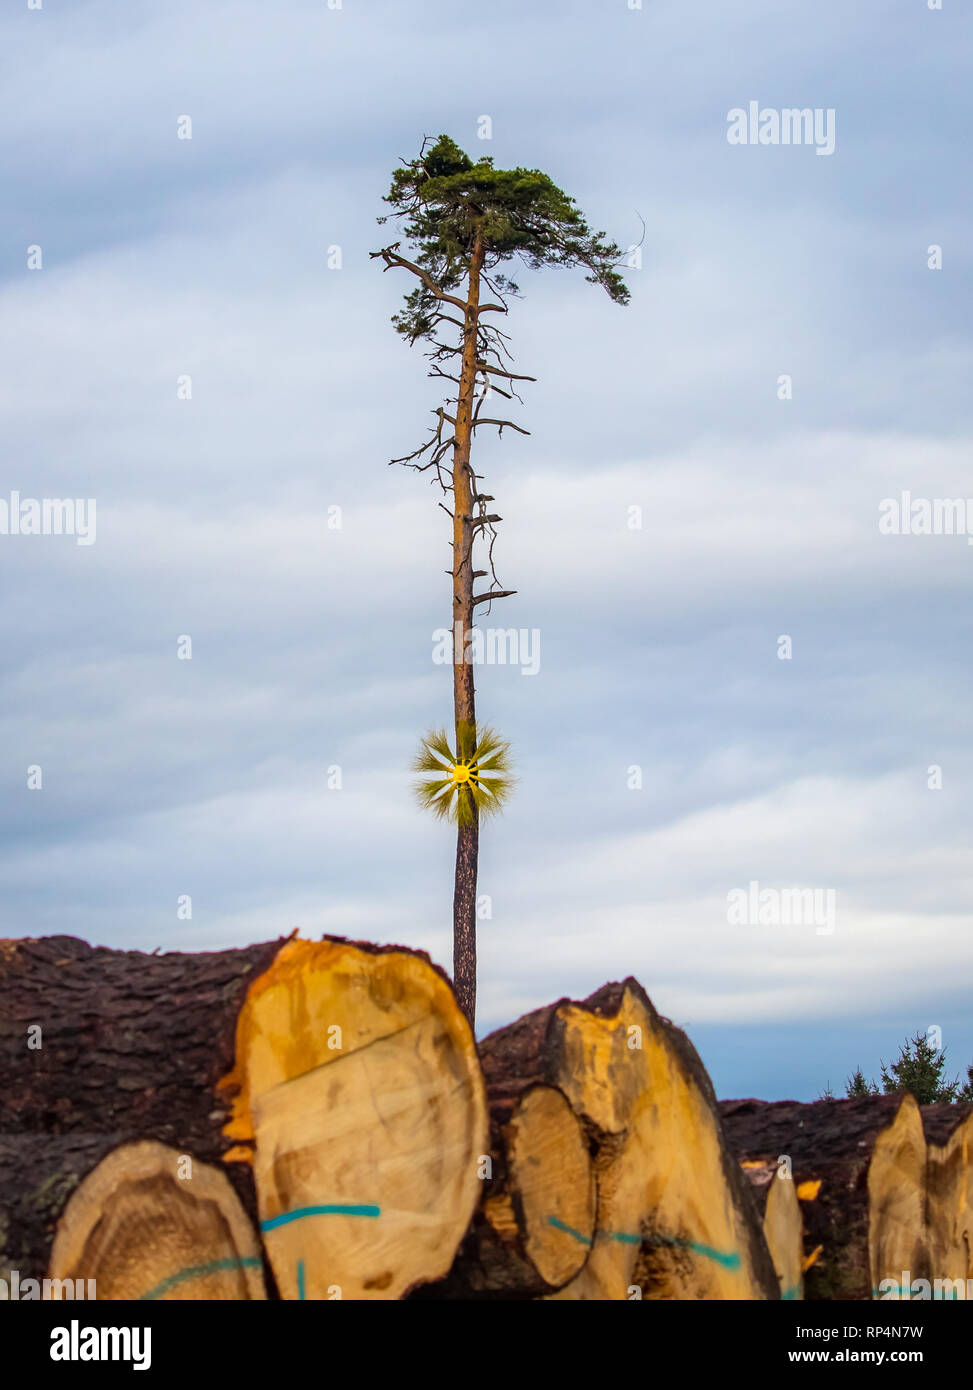 tree death forest dieback scene with one last tree standing, save nature environment Stock Photo